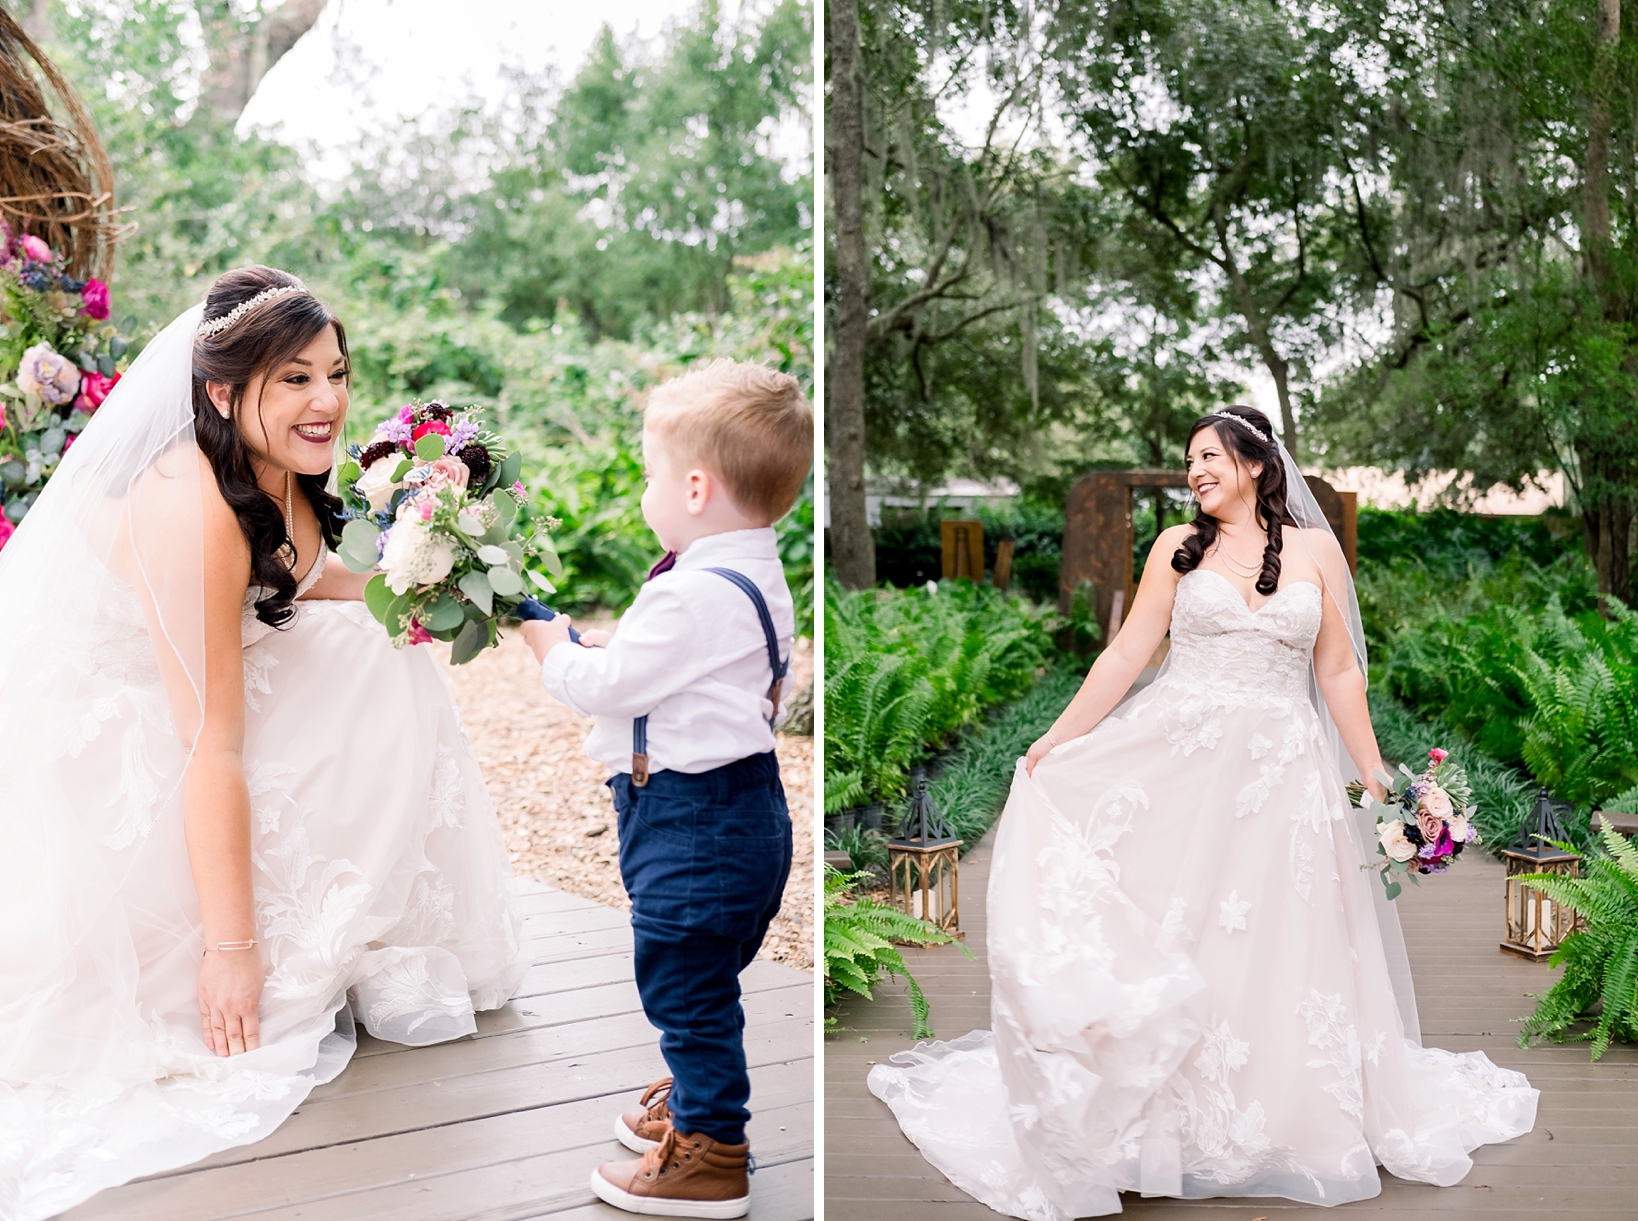 Bride smiles at her ring bearer and walks down the wooden aisle of her wedding ceremony